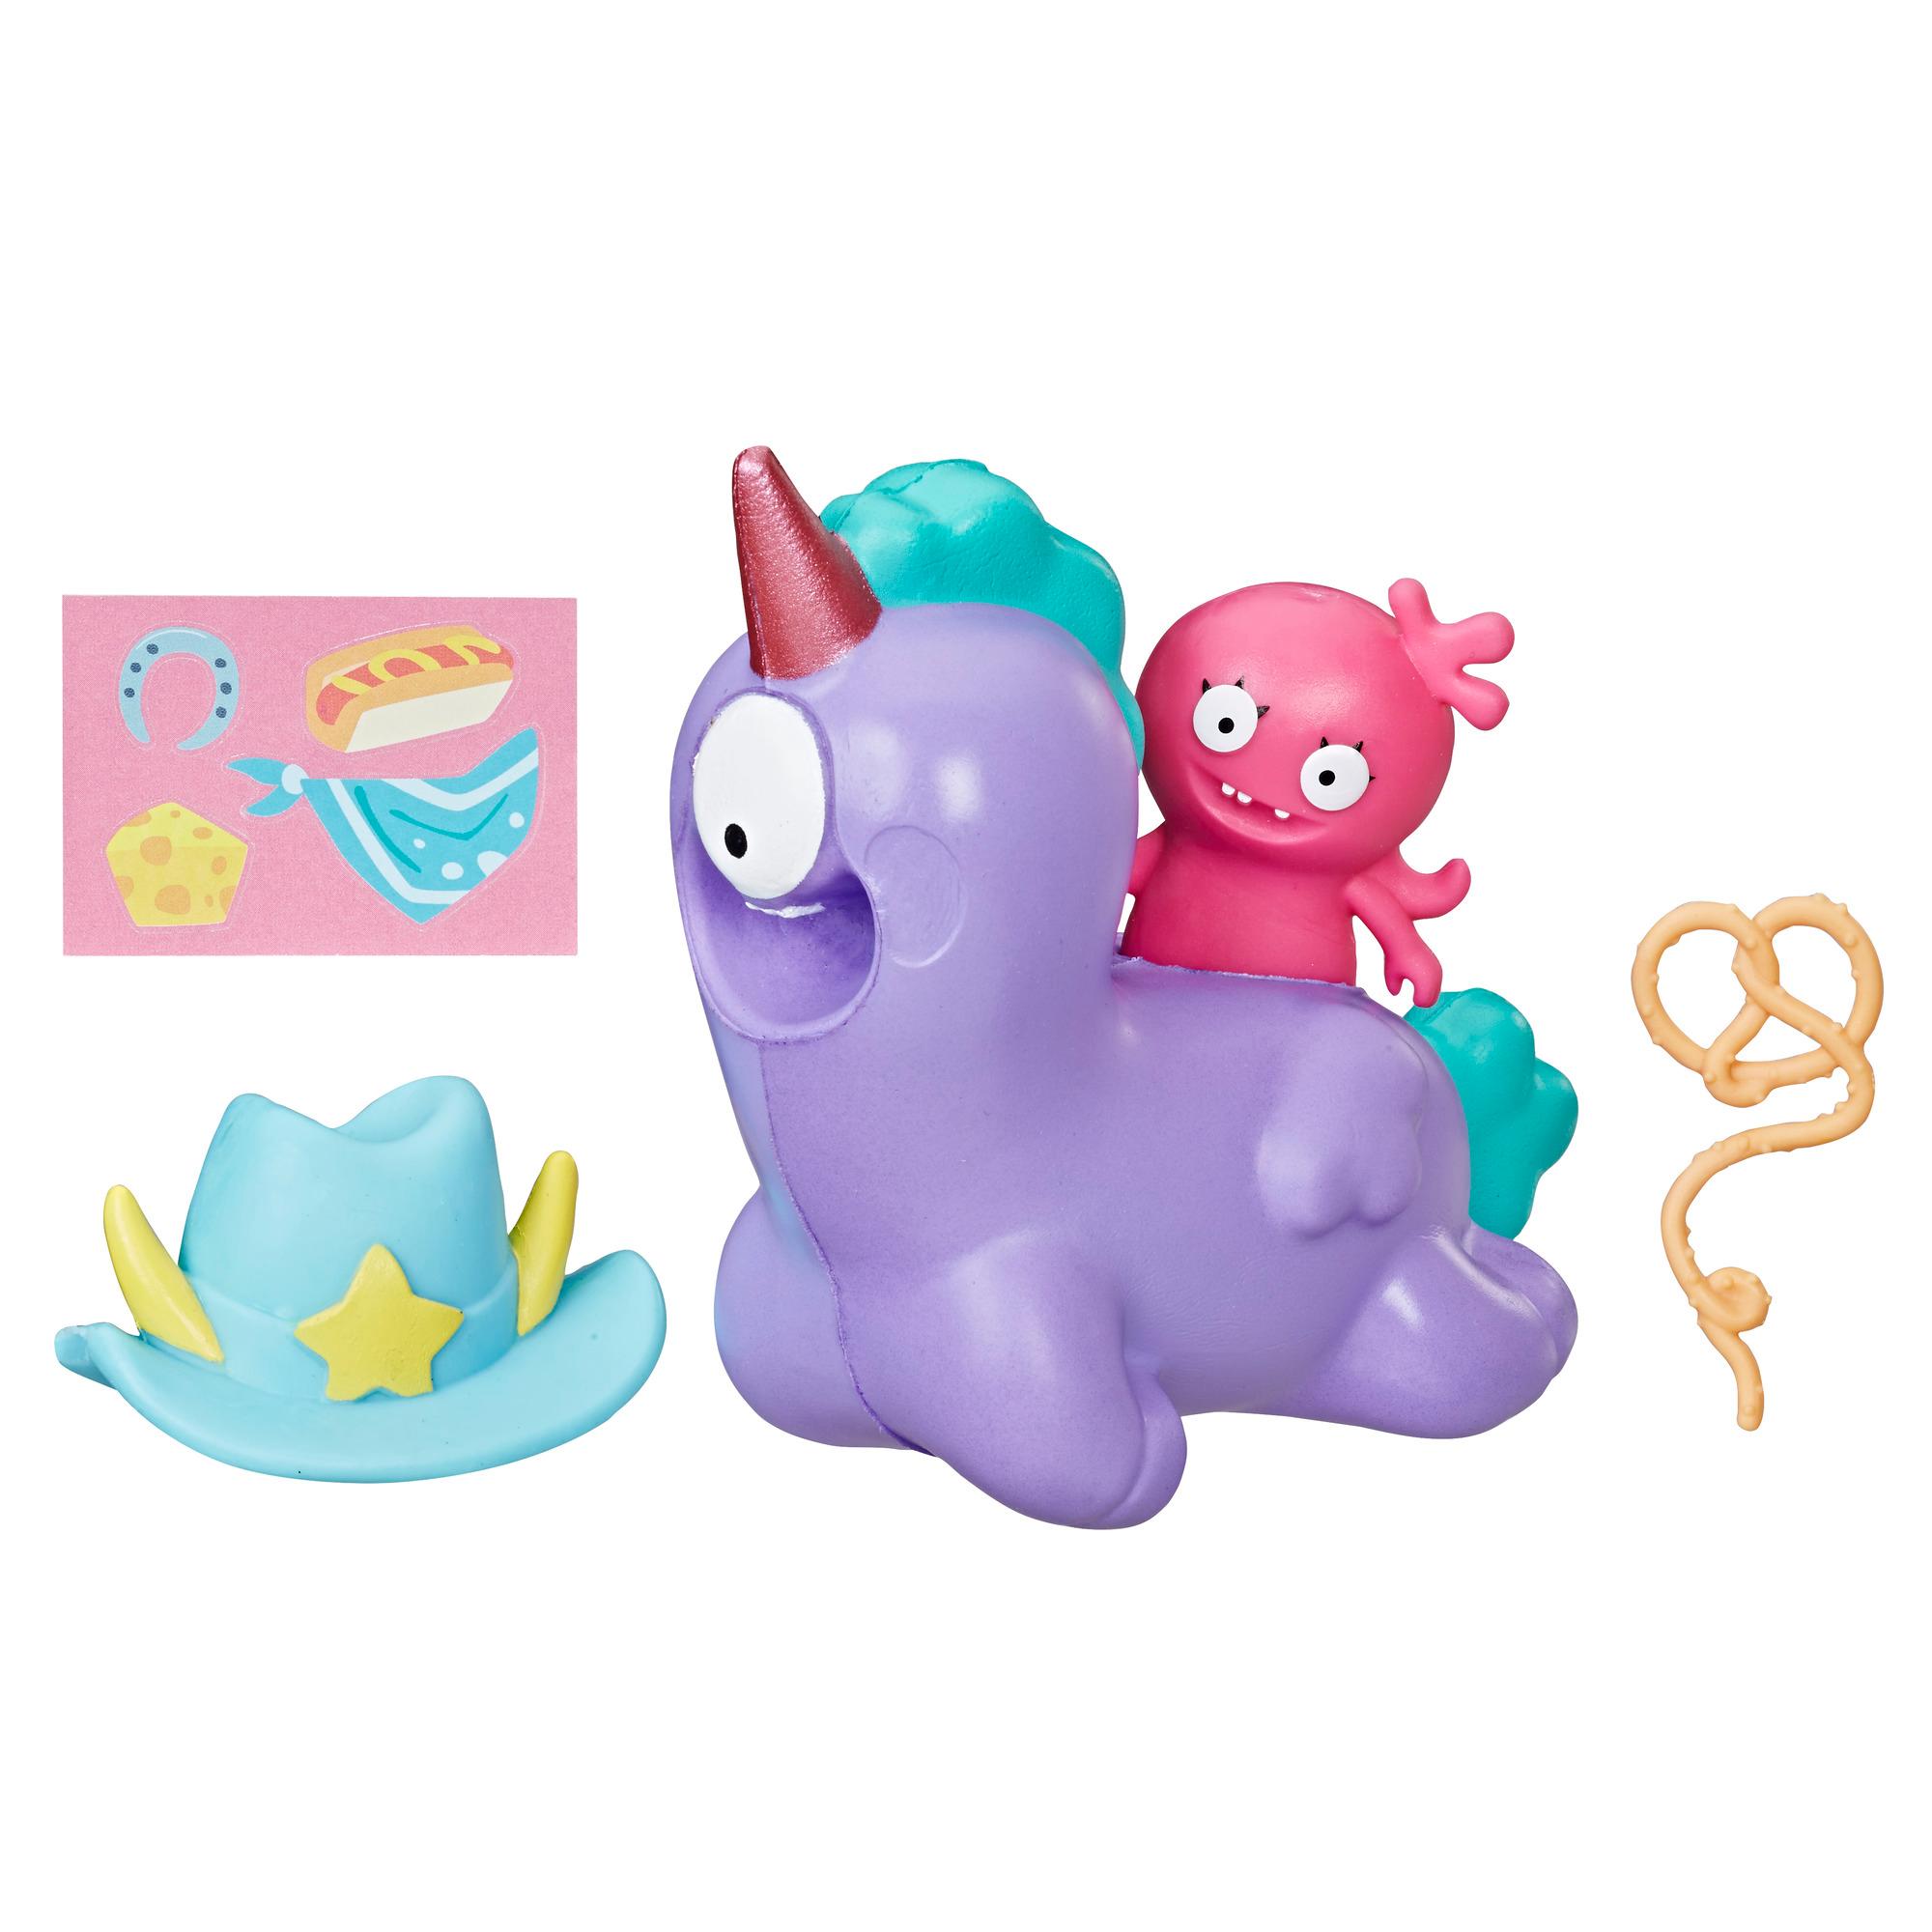 UglyDolls Moxy and Squish-and-Go Peggy, 2 Toy Figures with Accessories